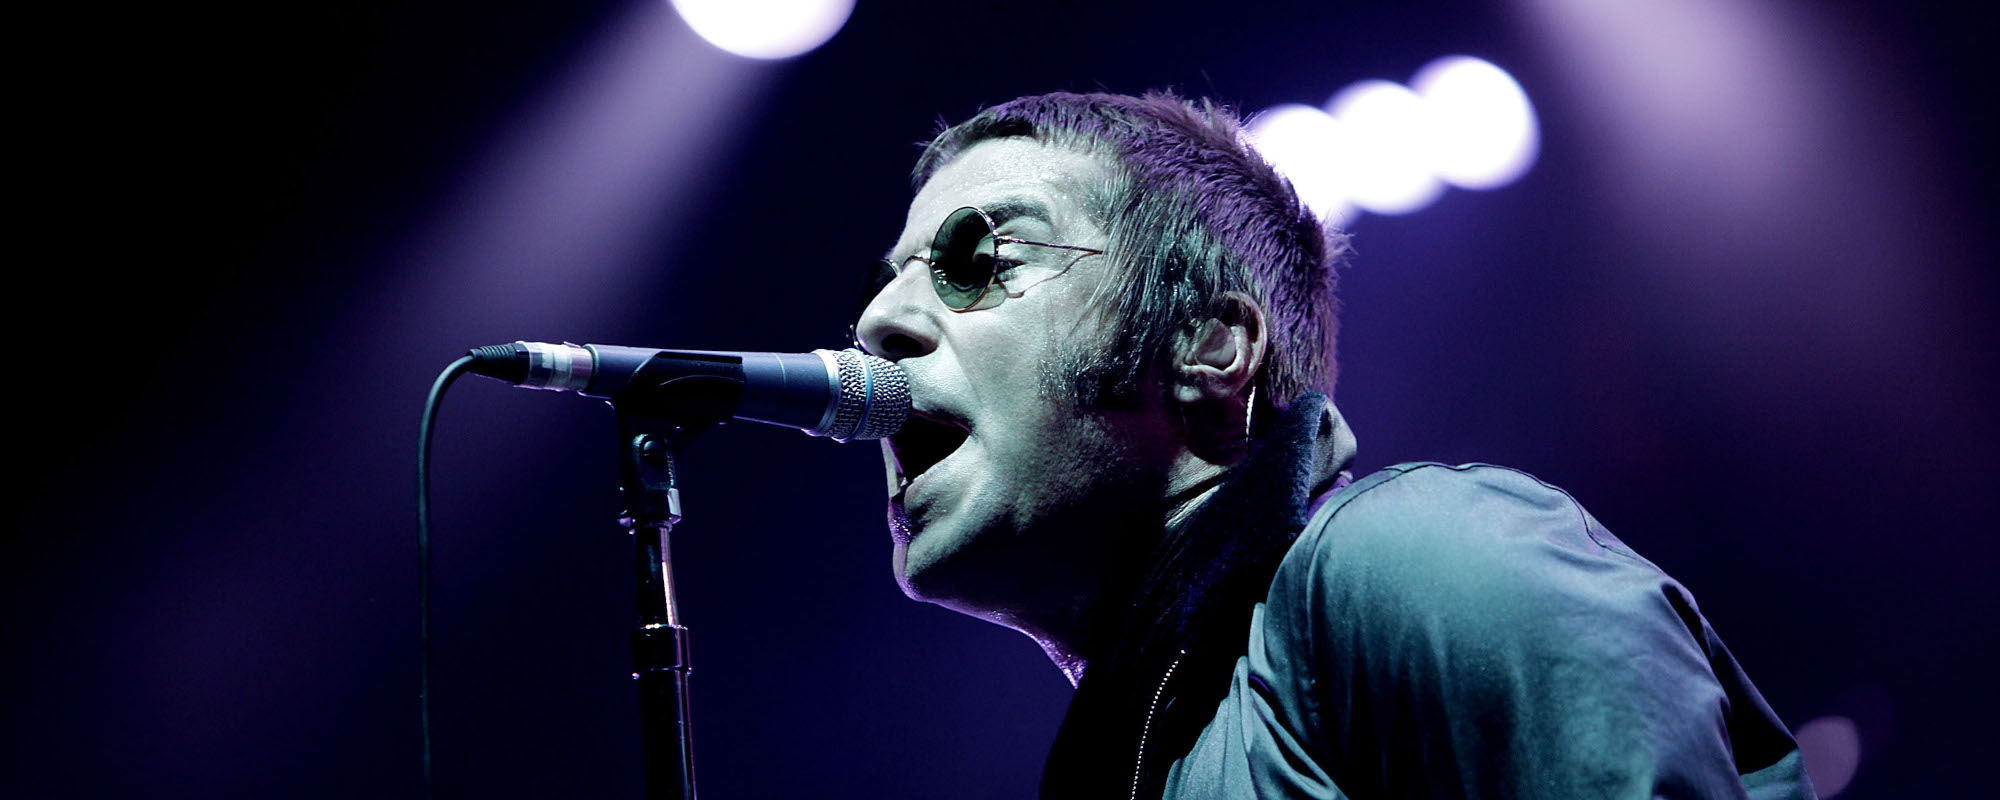 Remember When: Noel Gallagher Played an Oasis ‘MTV Unplugged’ Show without Brother Liam